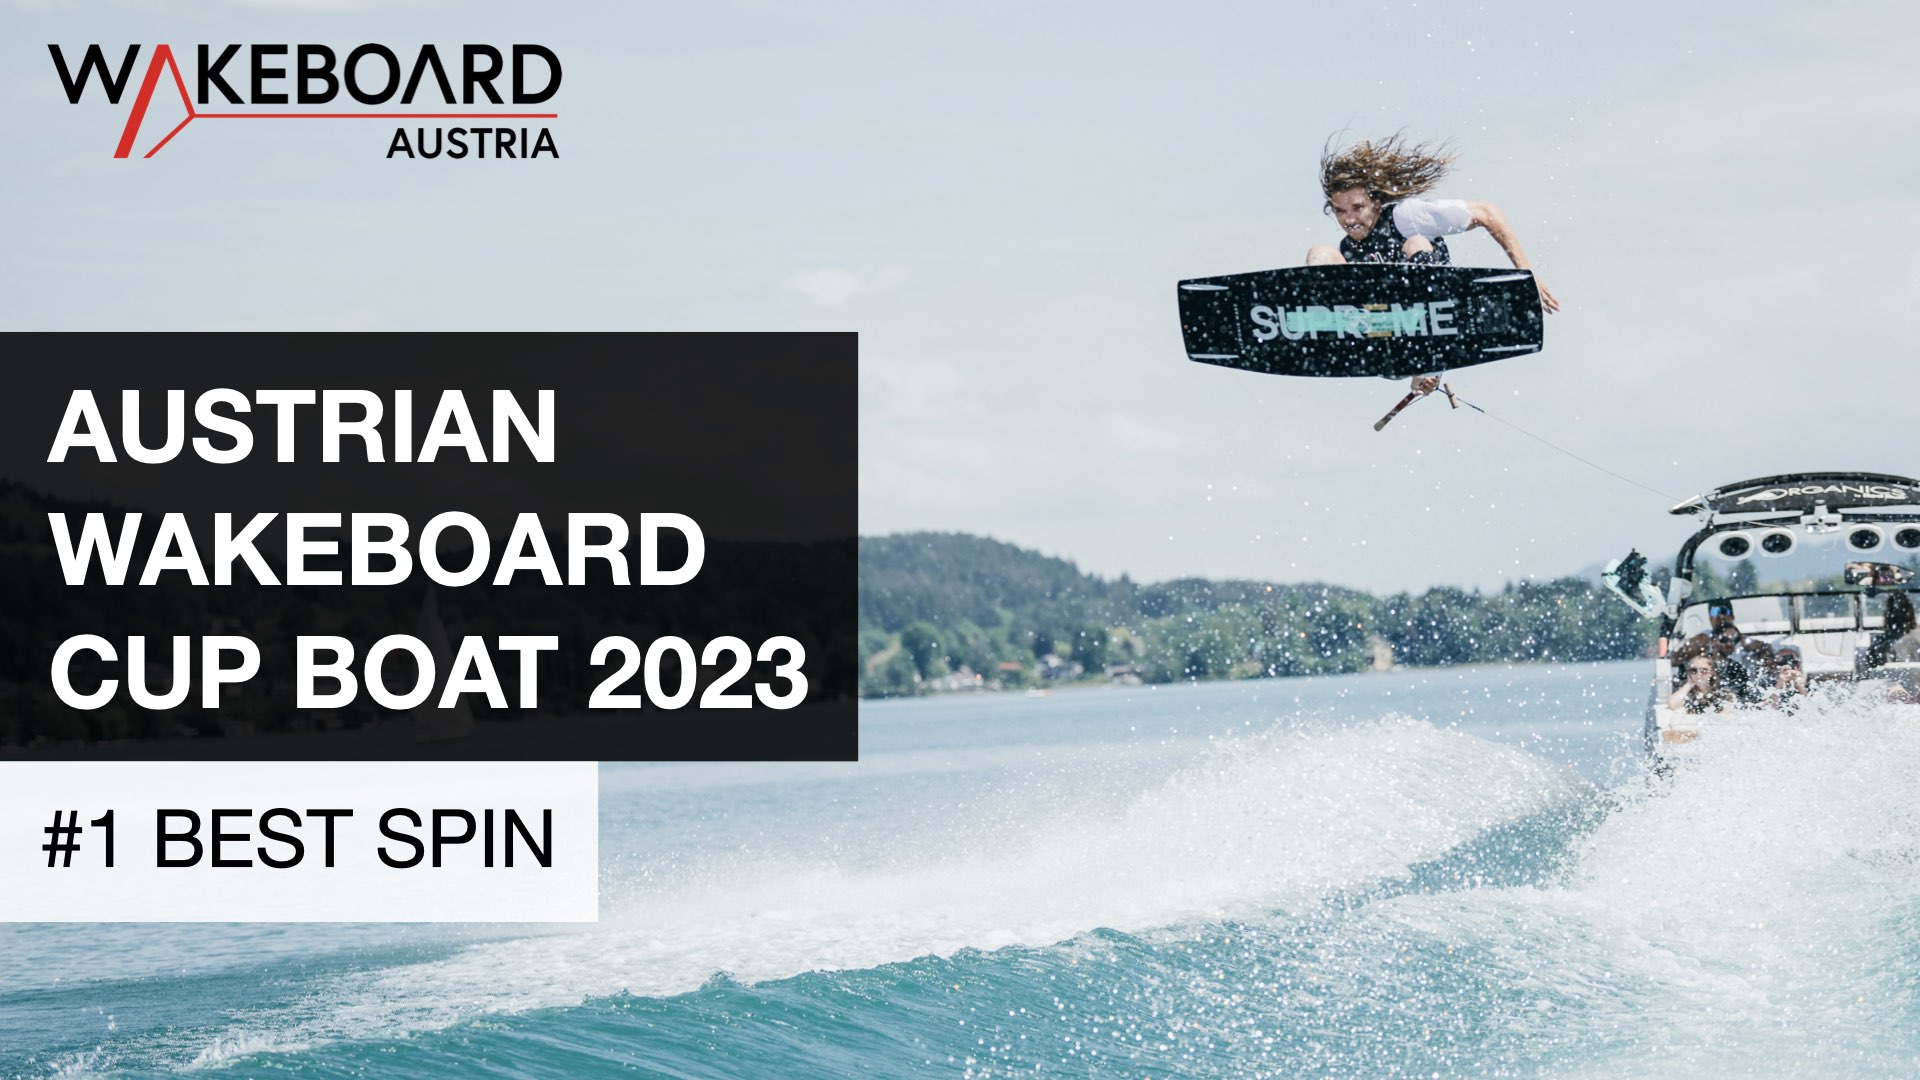 Wakeboard Boat Tour Austria 2023: #1 Best Spin